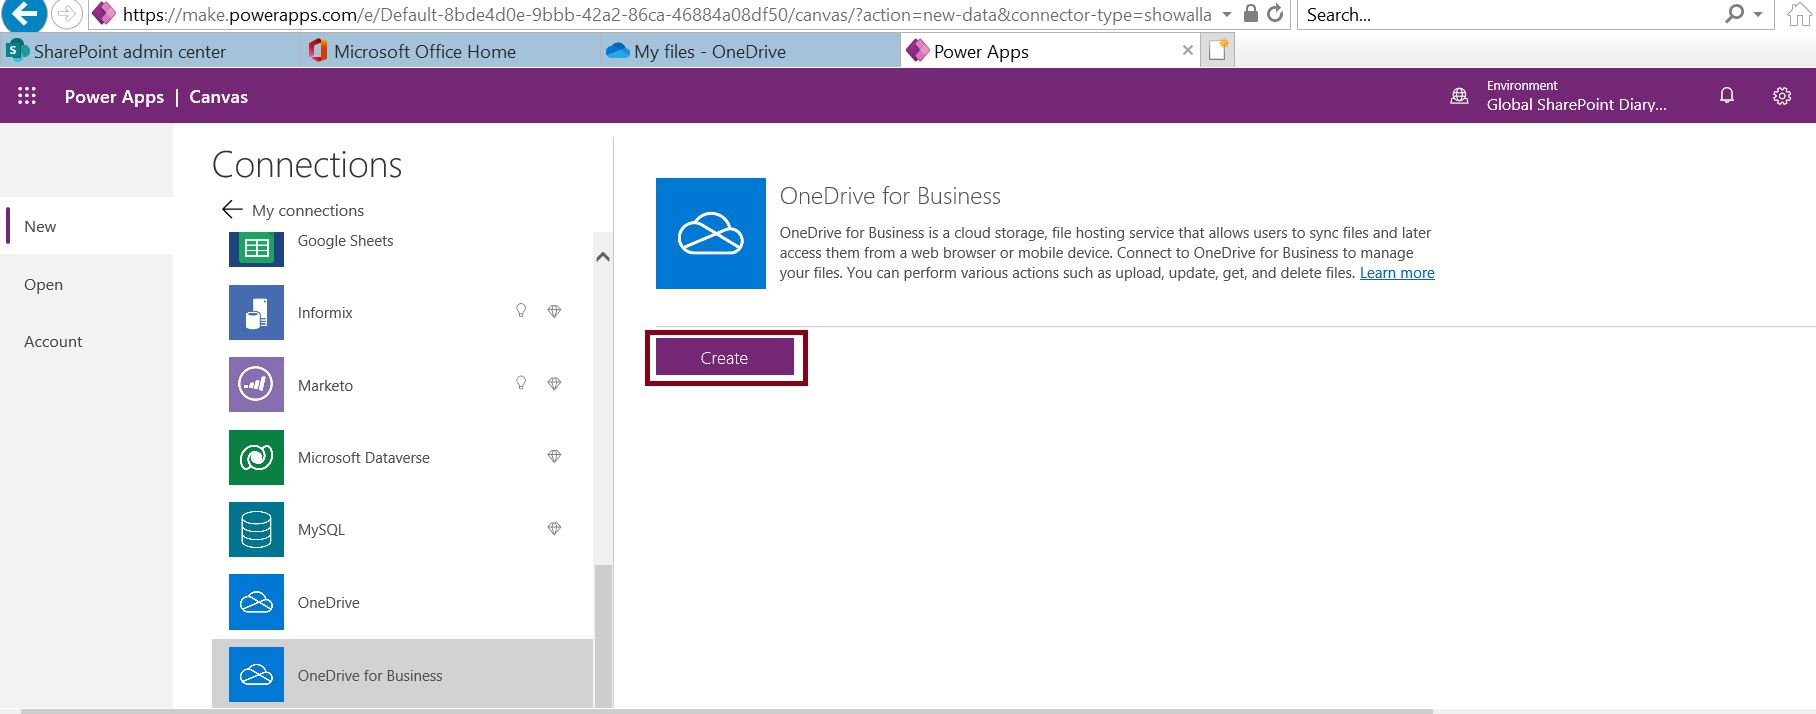 Create OneDrive for business connection in PowerApps